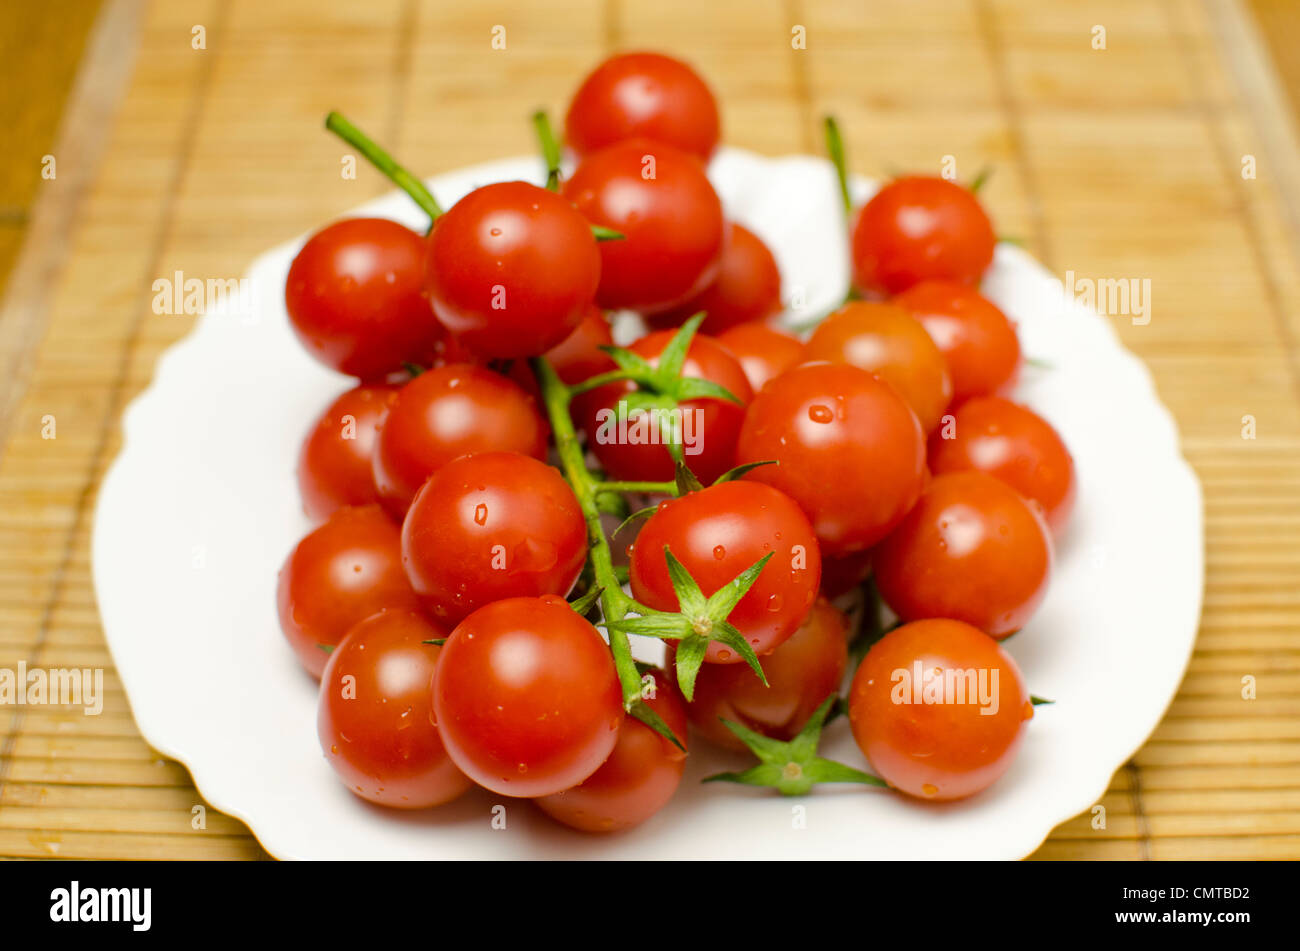 A bunch of tomatoes on a plate, shallow death of the field. Stock Photo